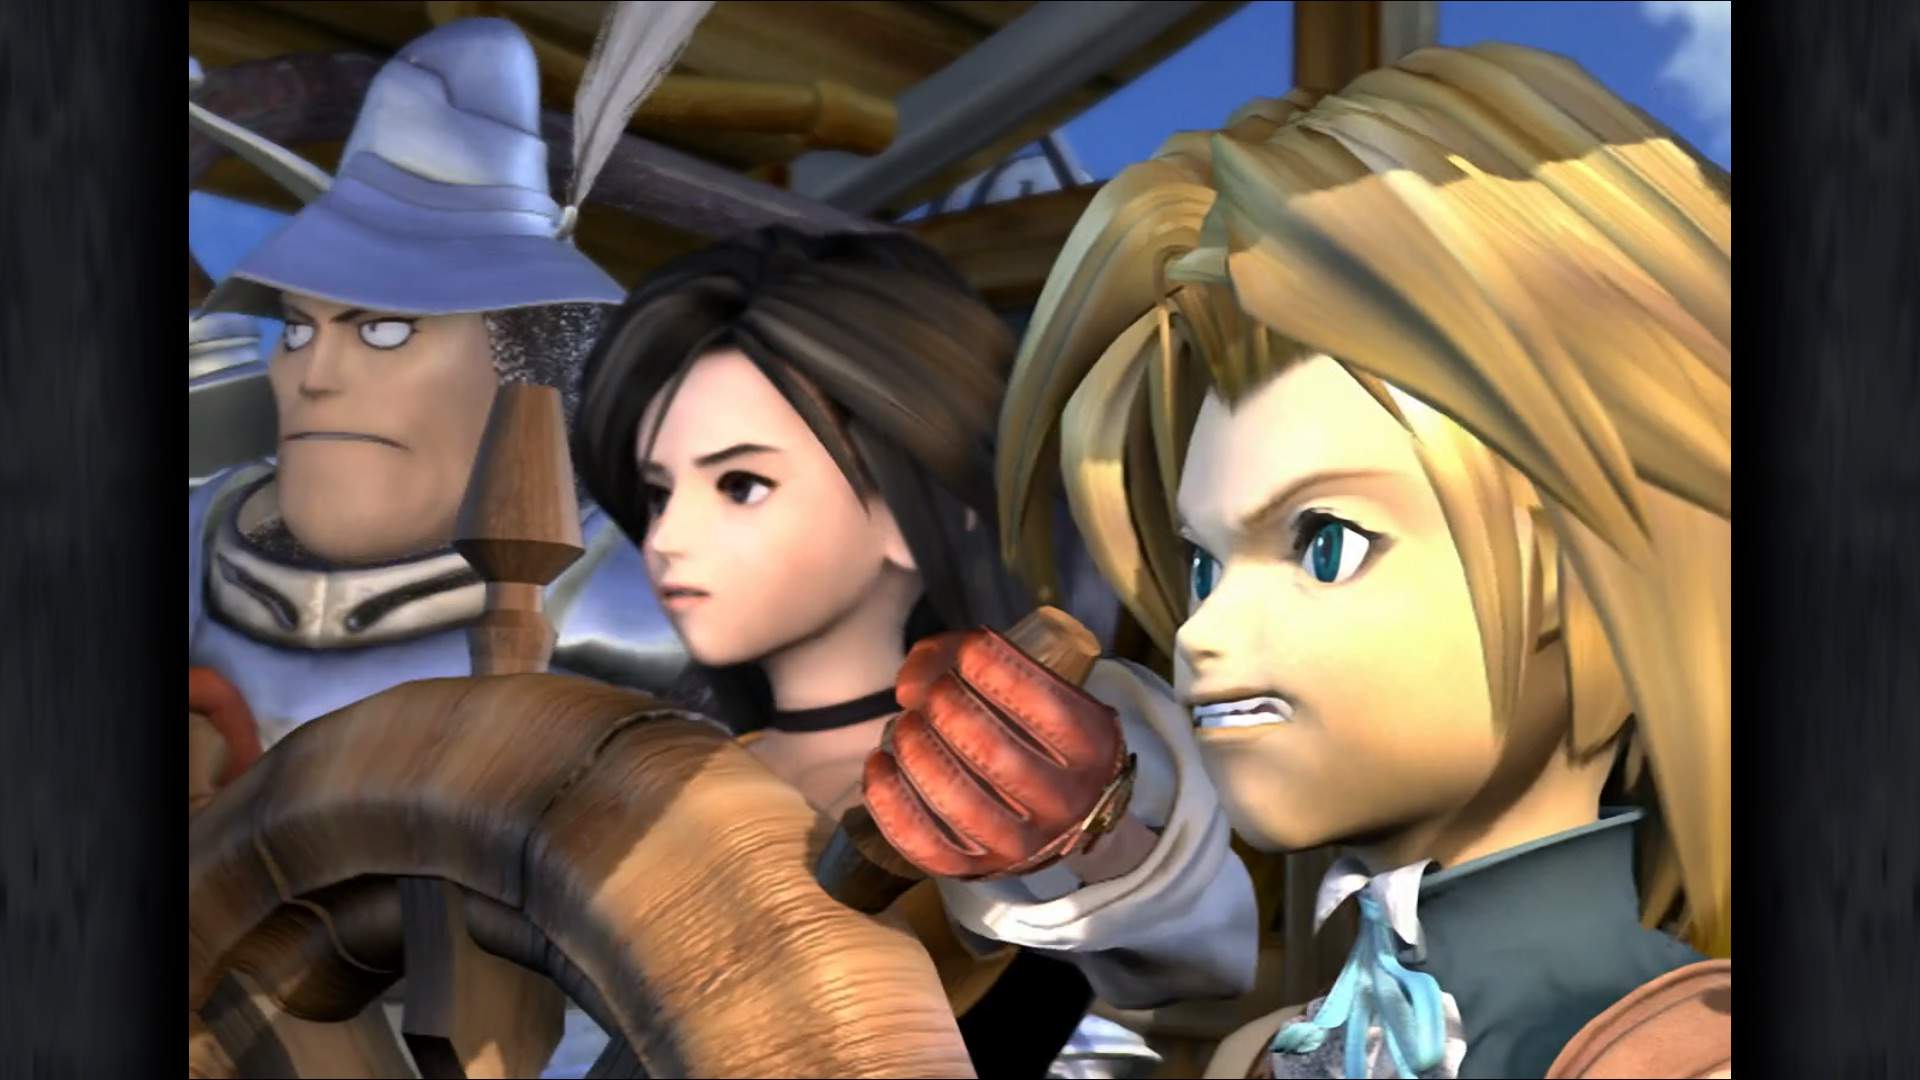 Final Fantasy Ix Is Out Now For Nintendo Switch And Xbox One